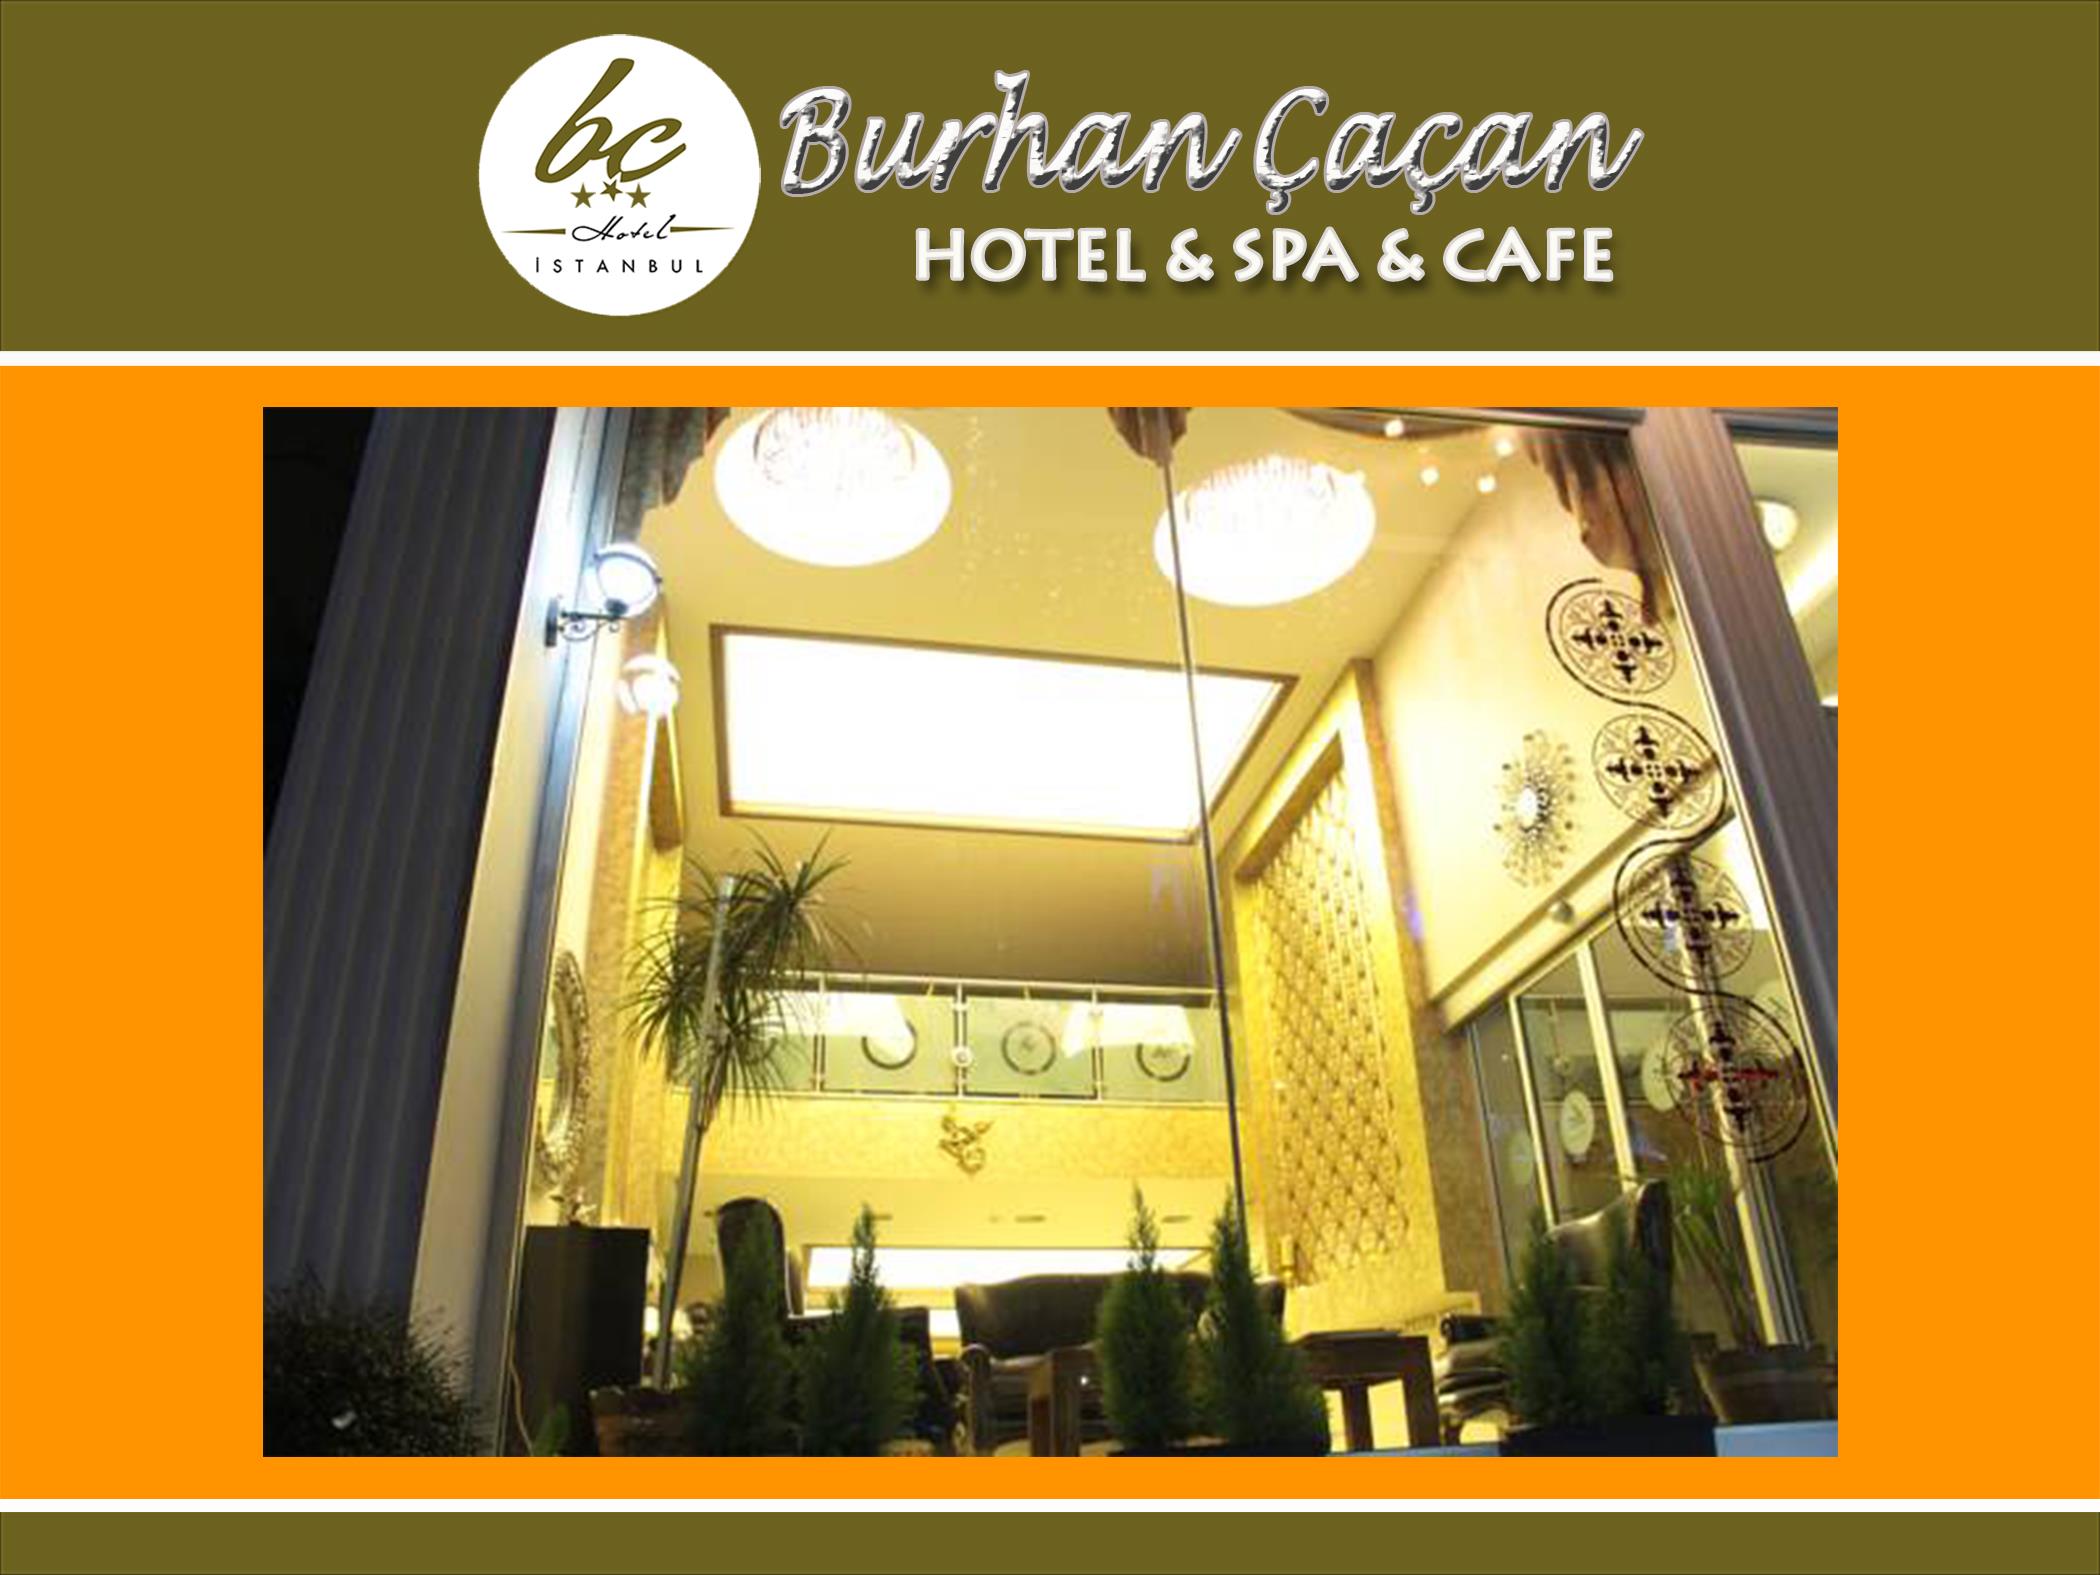 BC Burhan Cacan Hotel & Spa & Cafe image 1